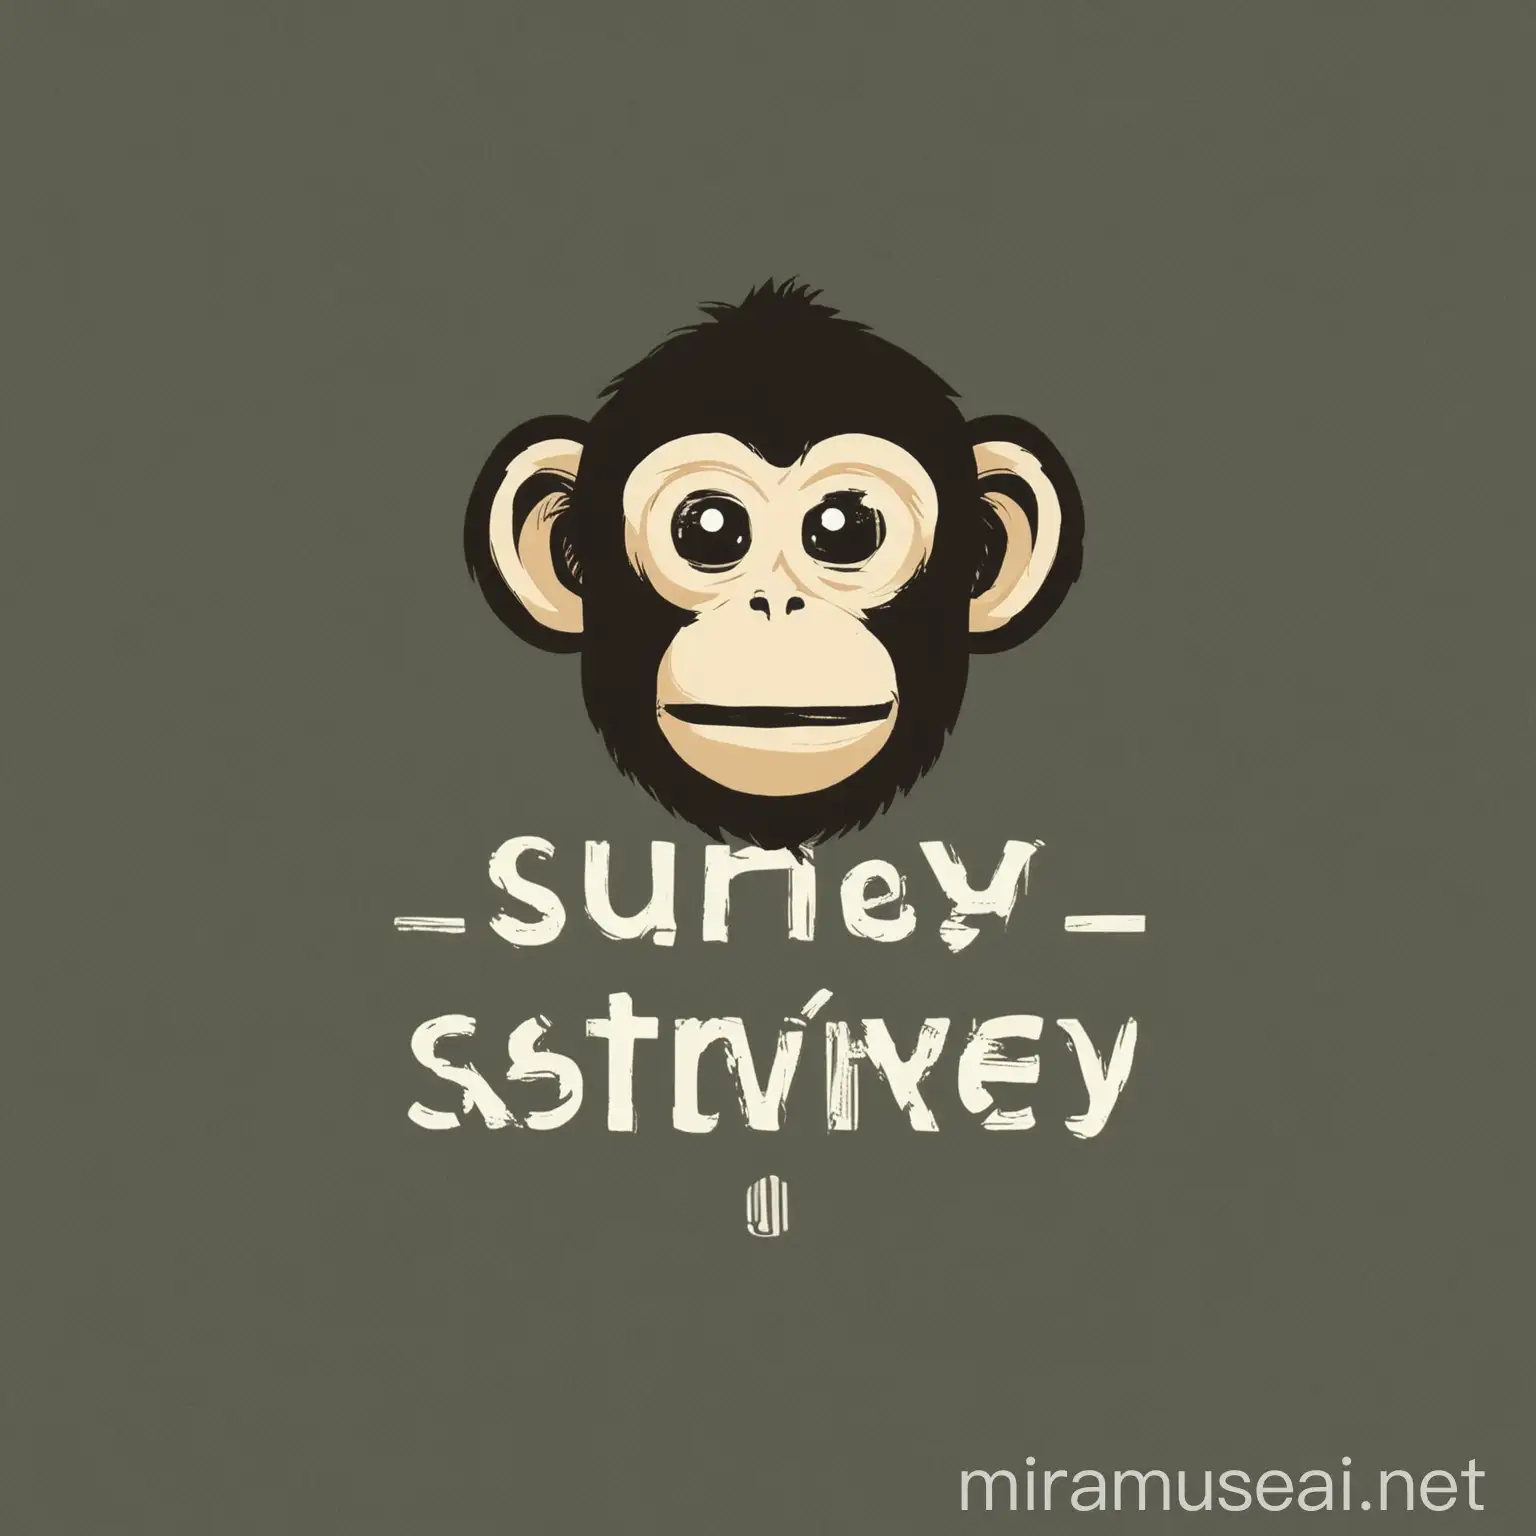 Curious Monkey Conducting Survey Among Diverse People